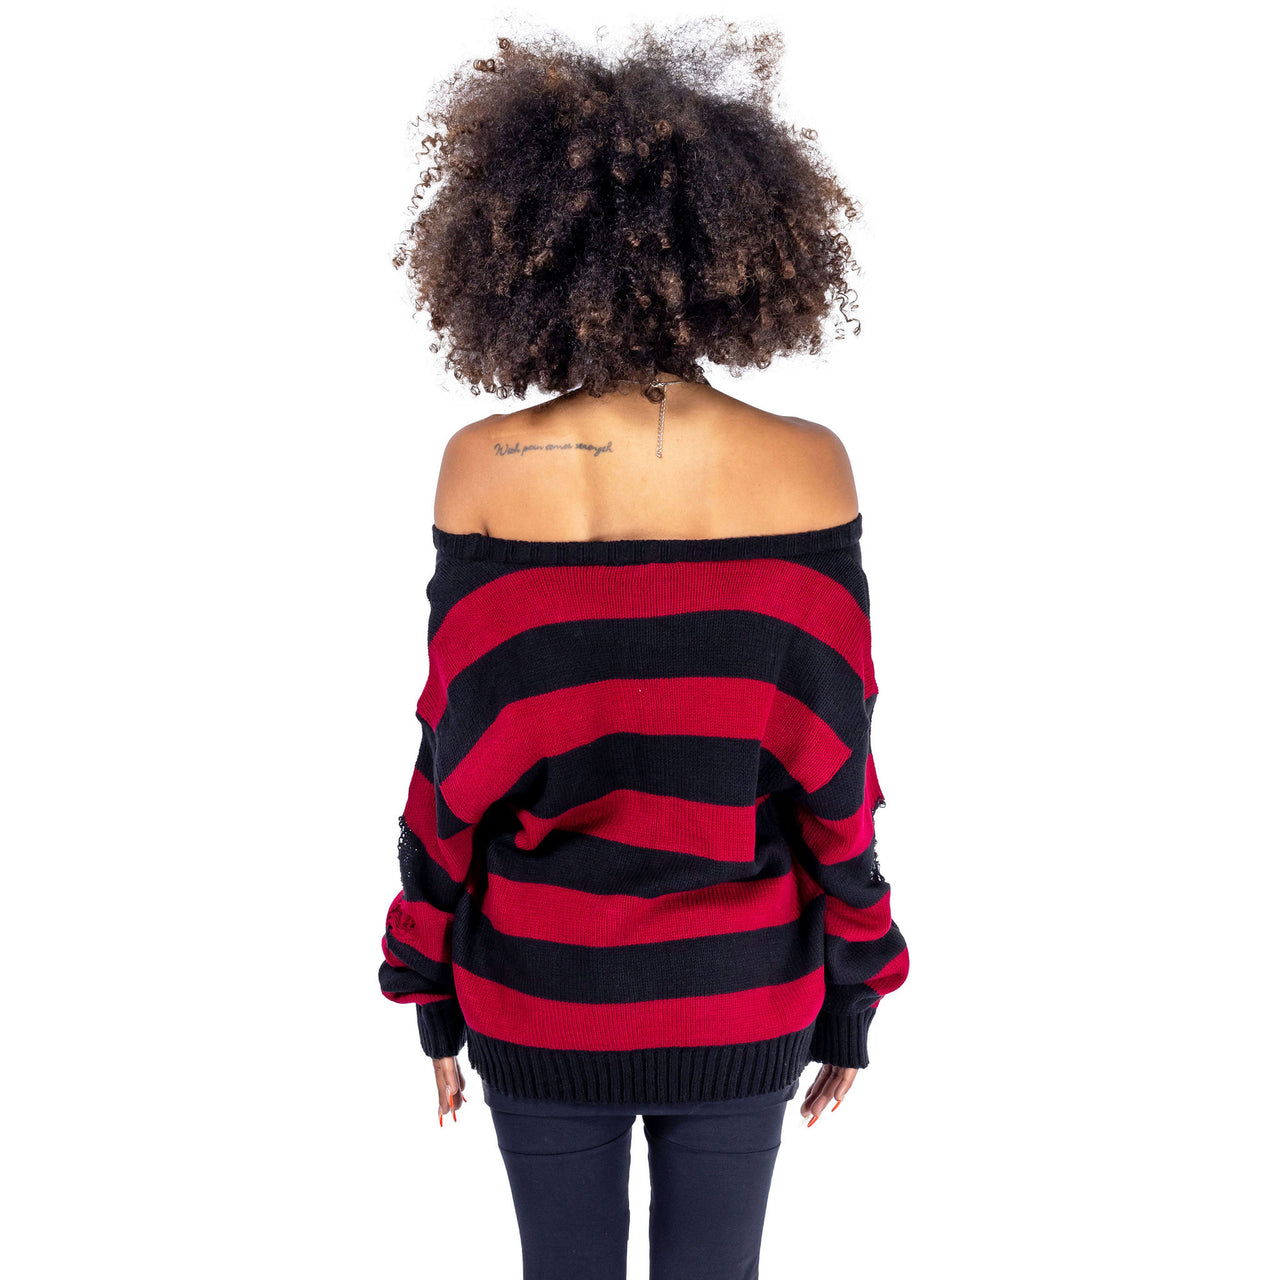 HEARTLESS VISION STRIPED SWEATER